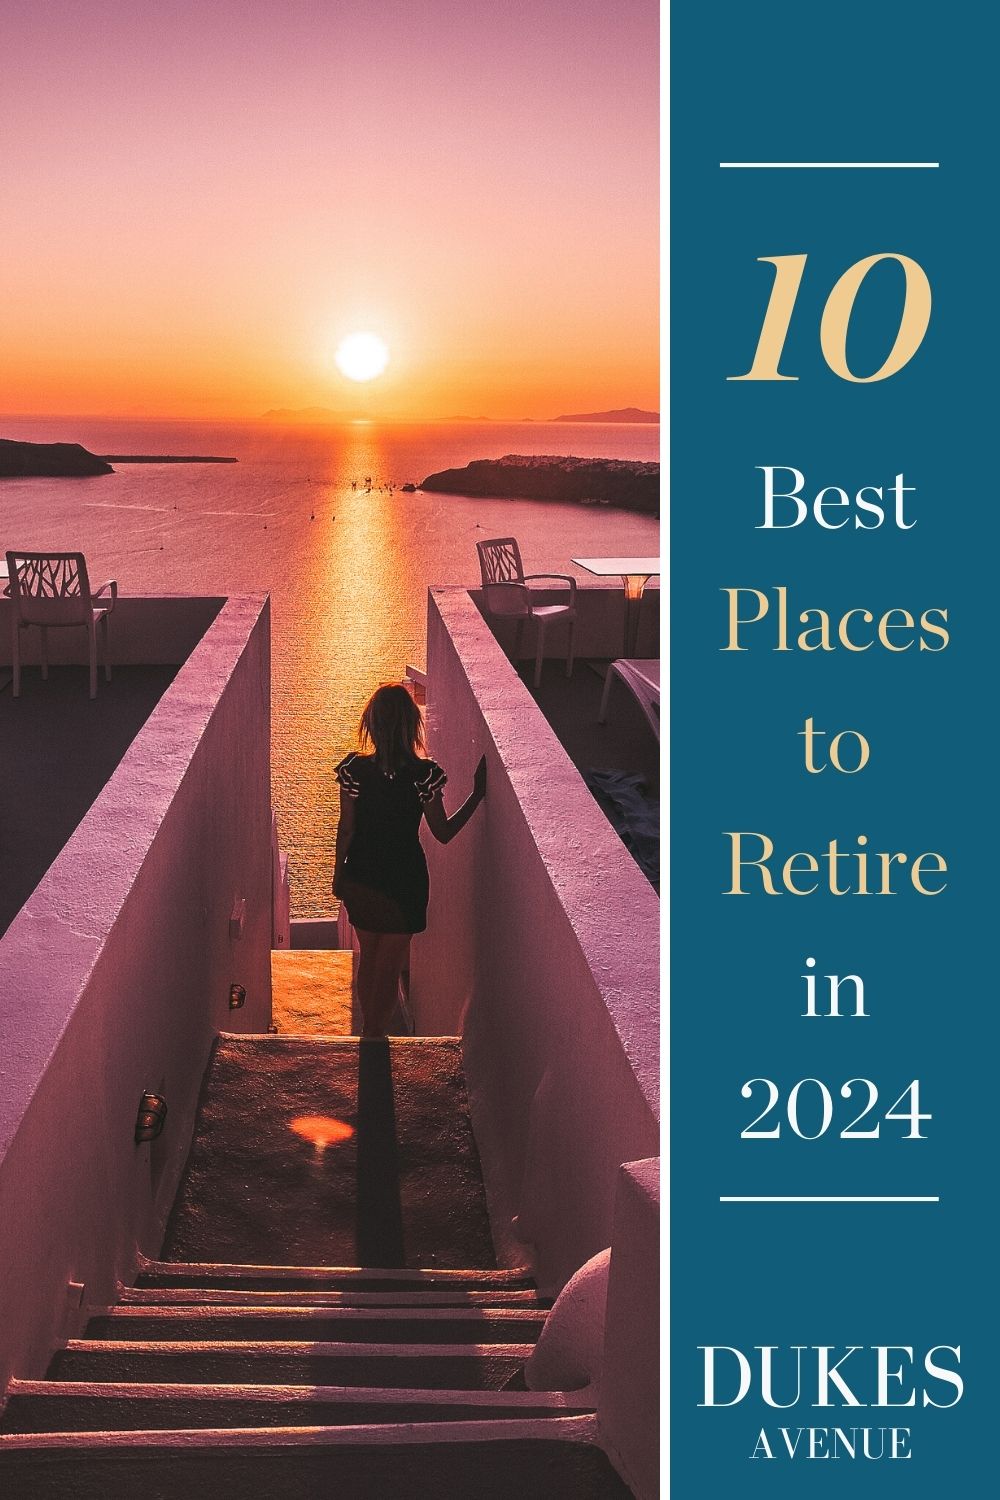 Image of woman walking down steps in Santorini at sunset with text overlay '10 Best Places to Retire in 2024'